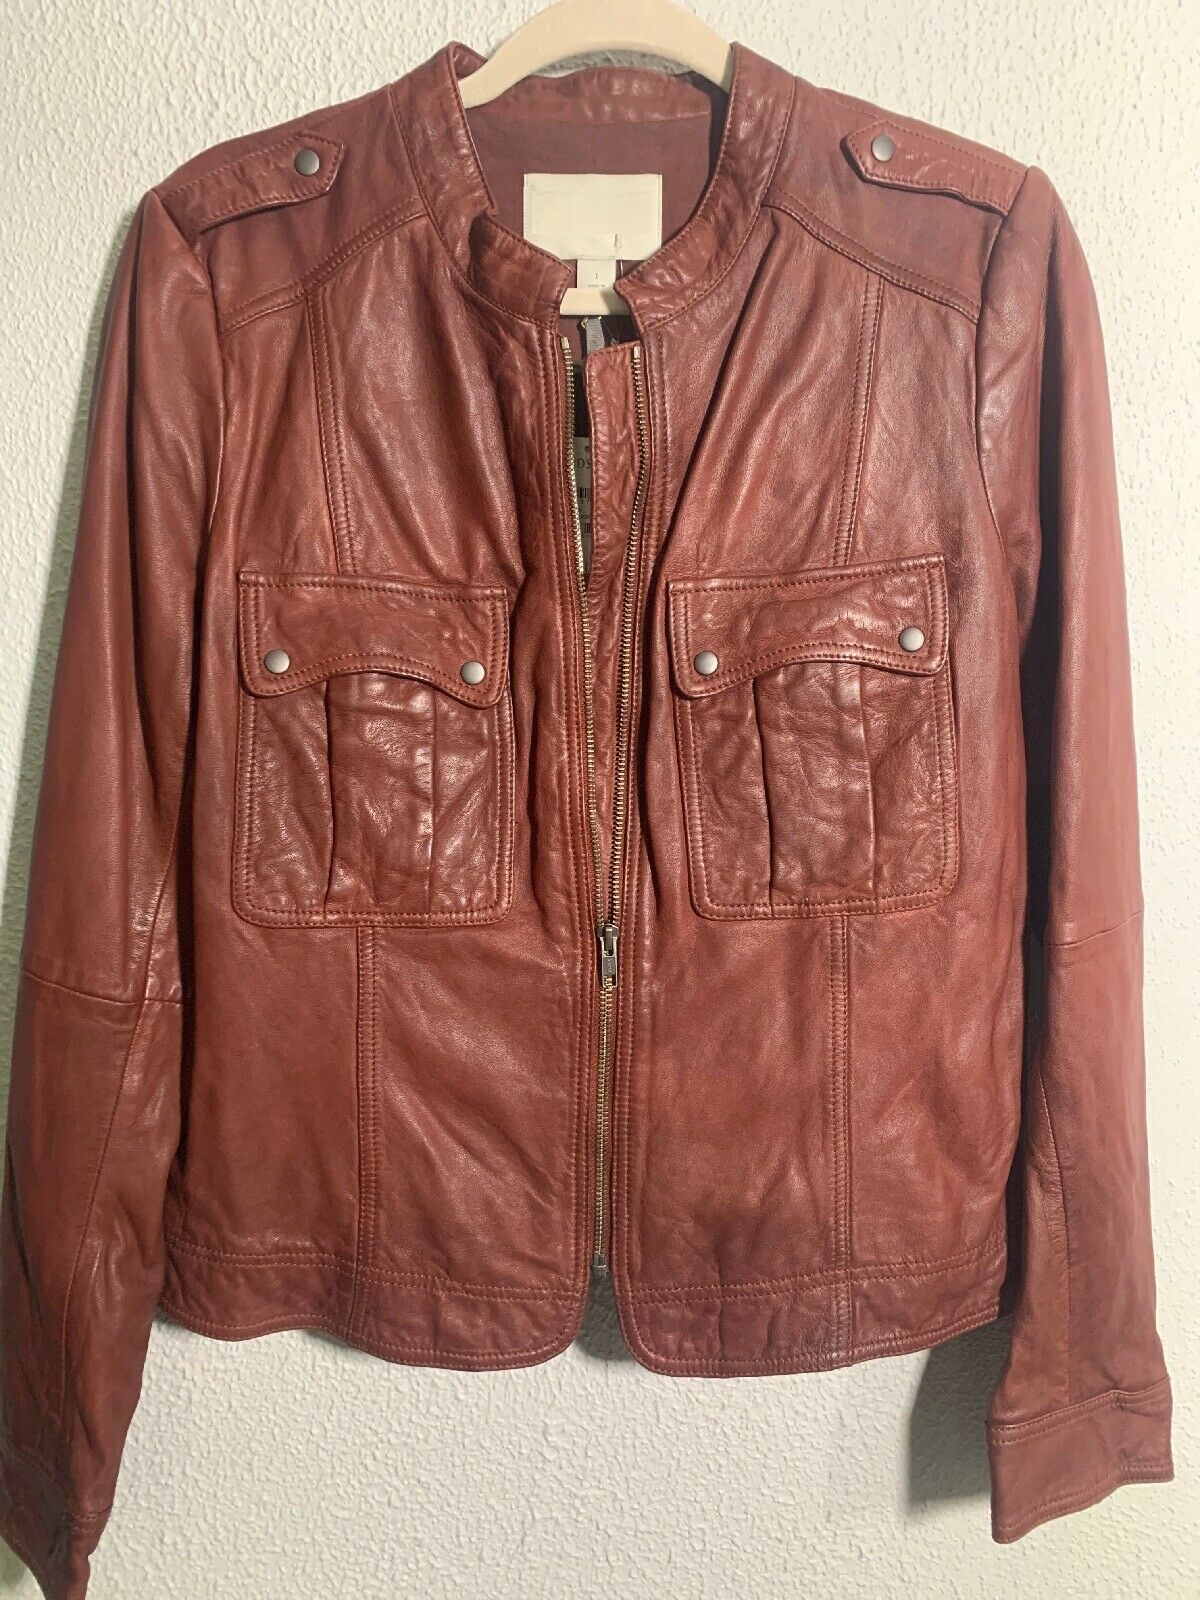 Womens Hinge Patch Whiskey Brown Leather Jacket - A2 Jackets